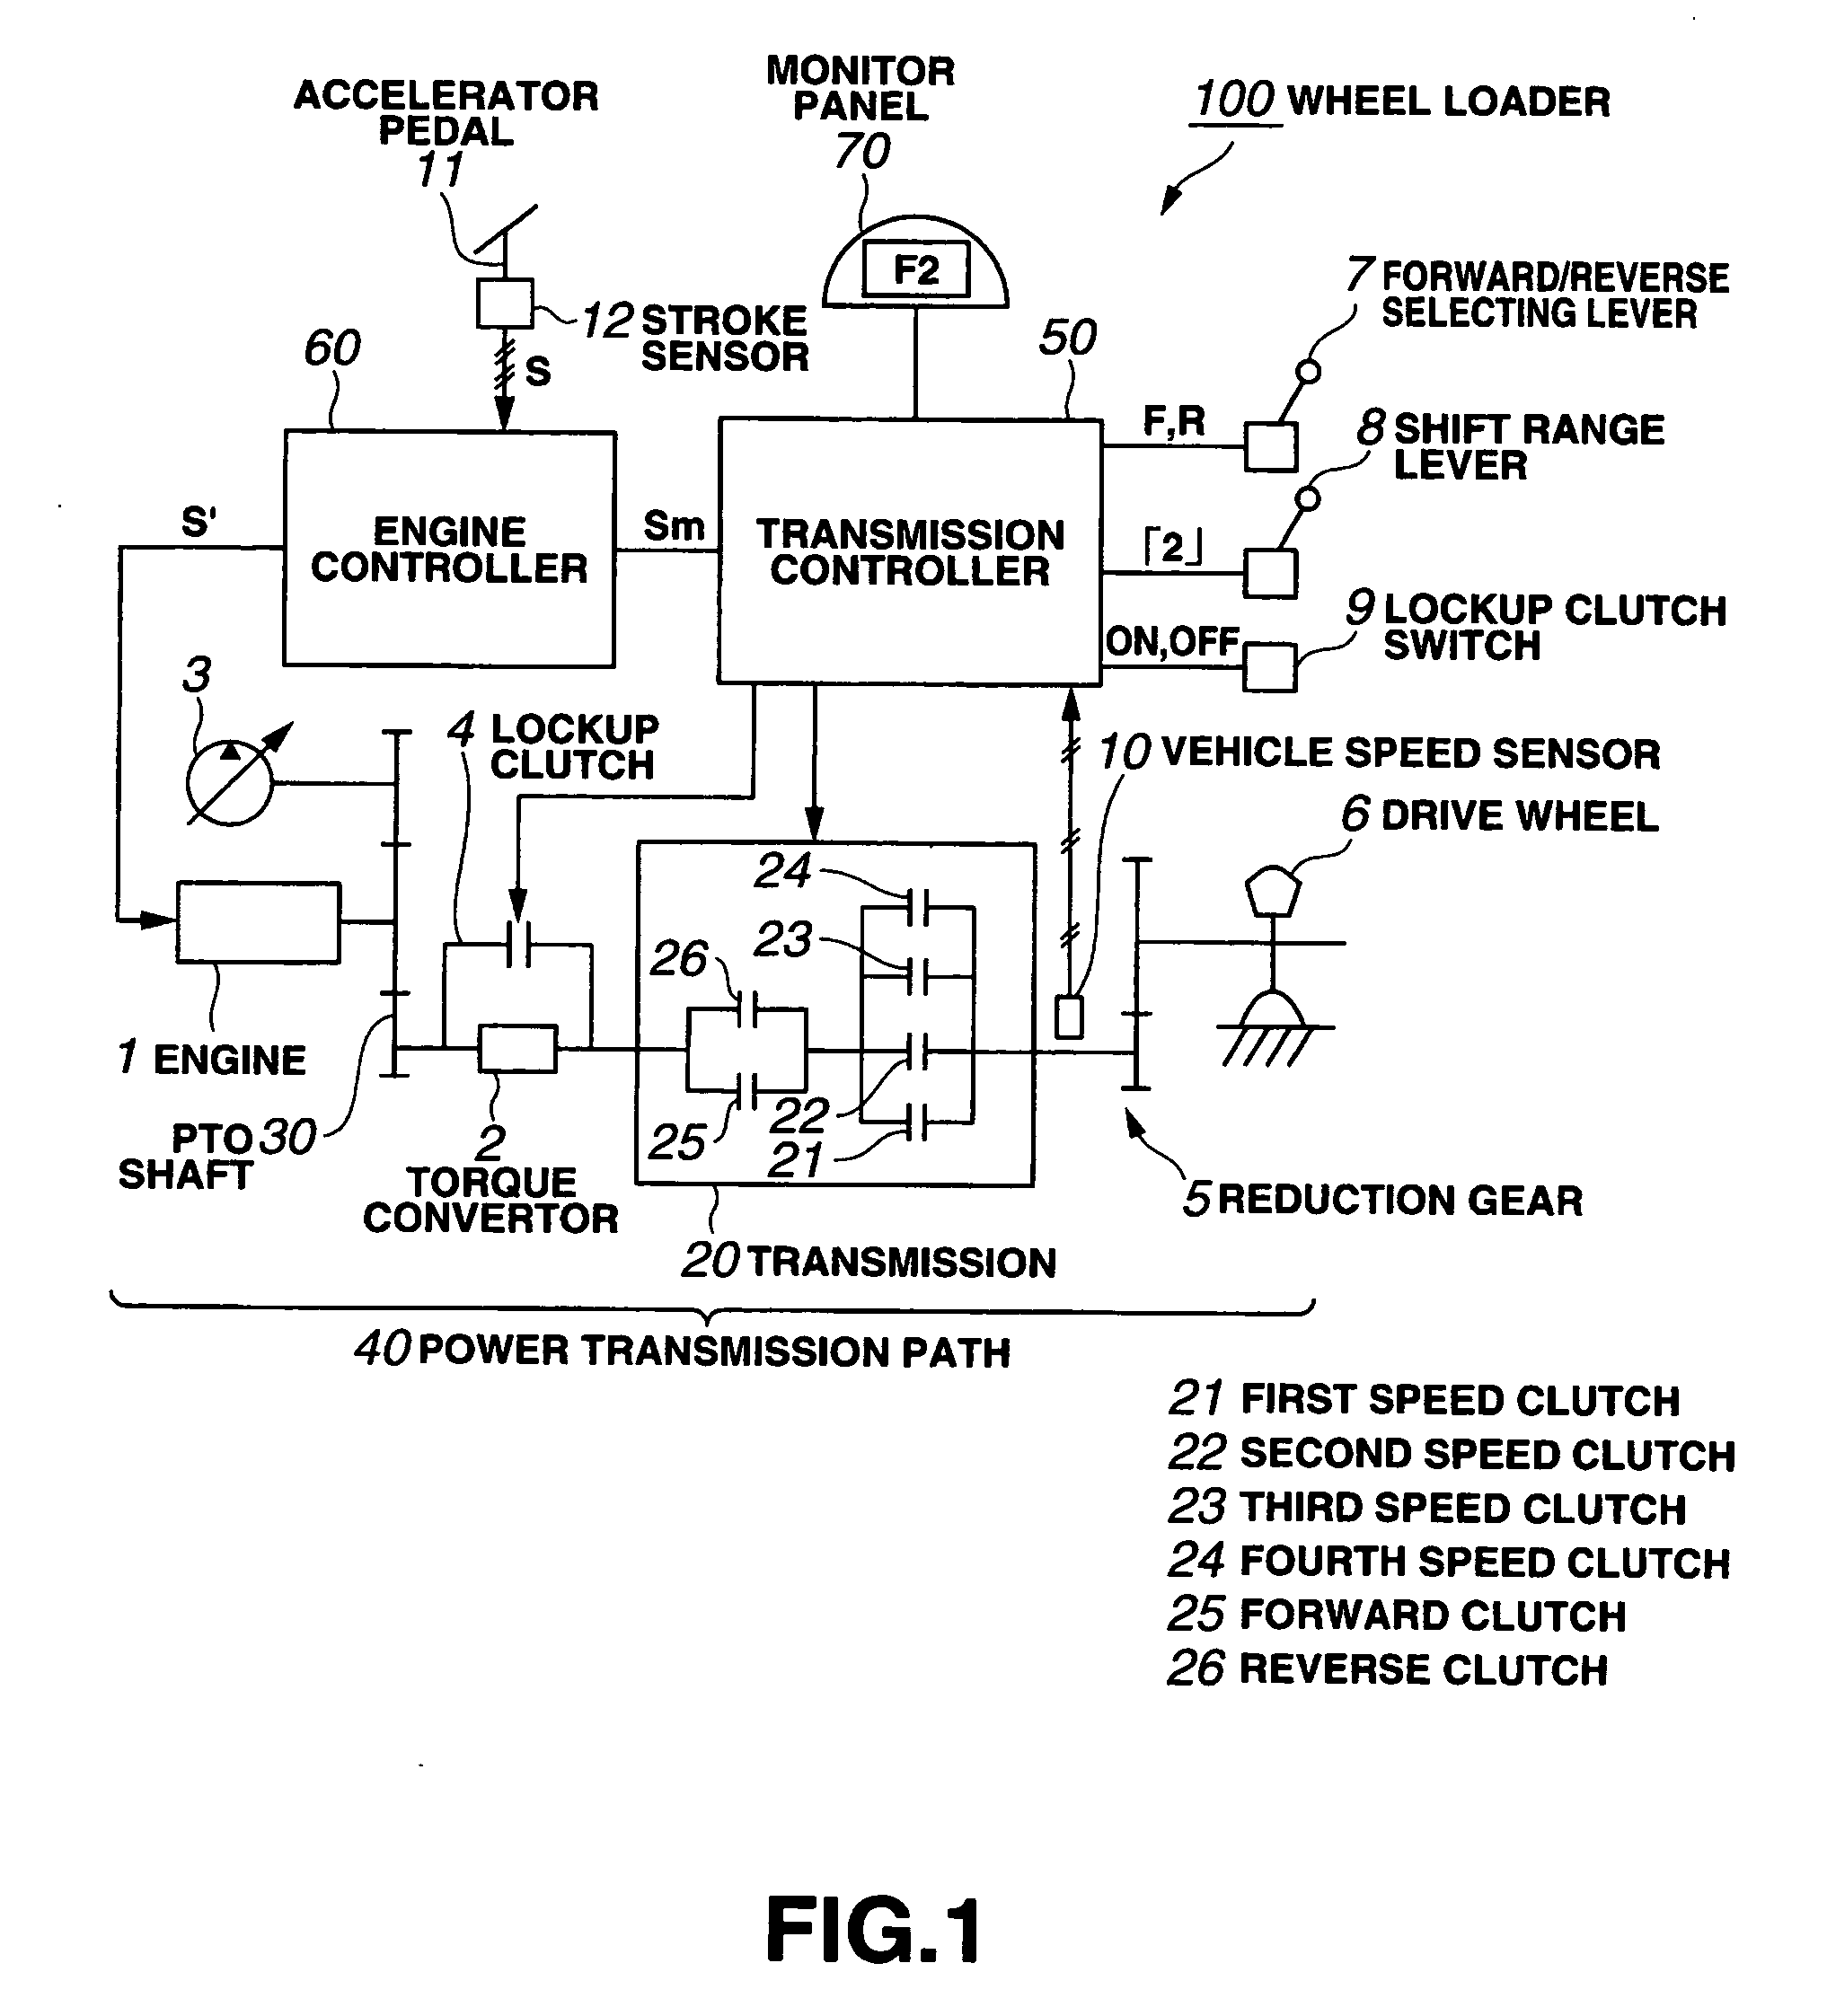 Engine Revolutions Control Device of Working Vehicle and Method